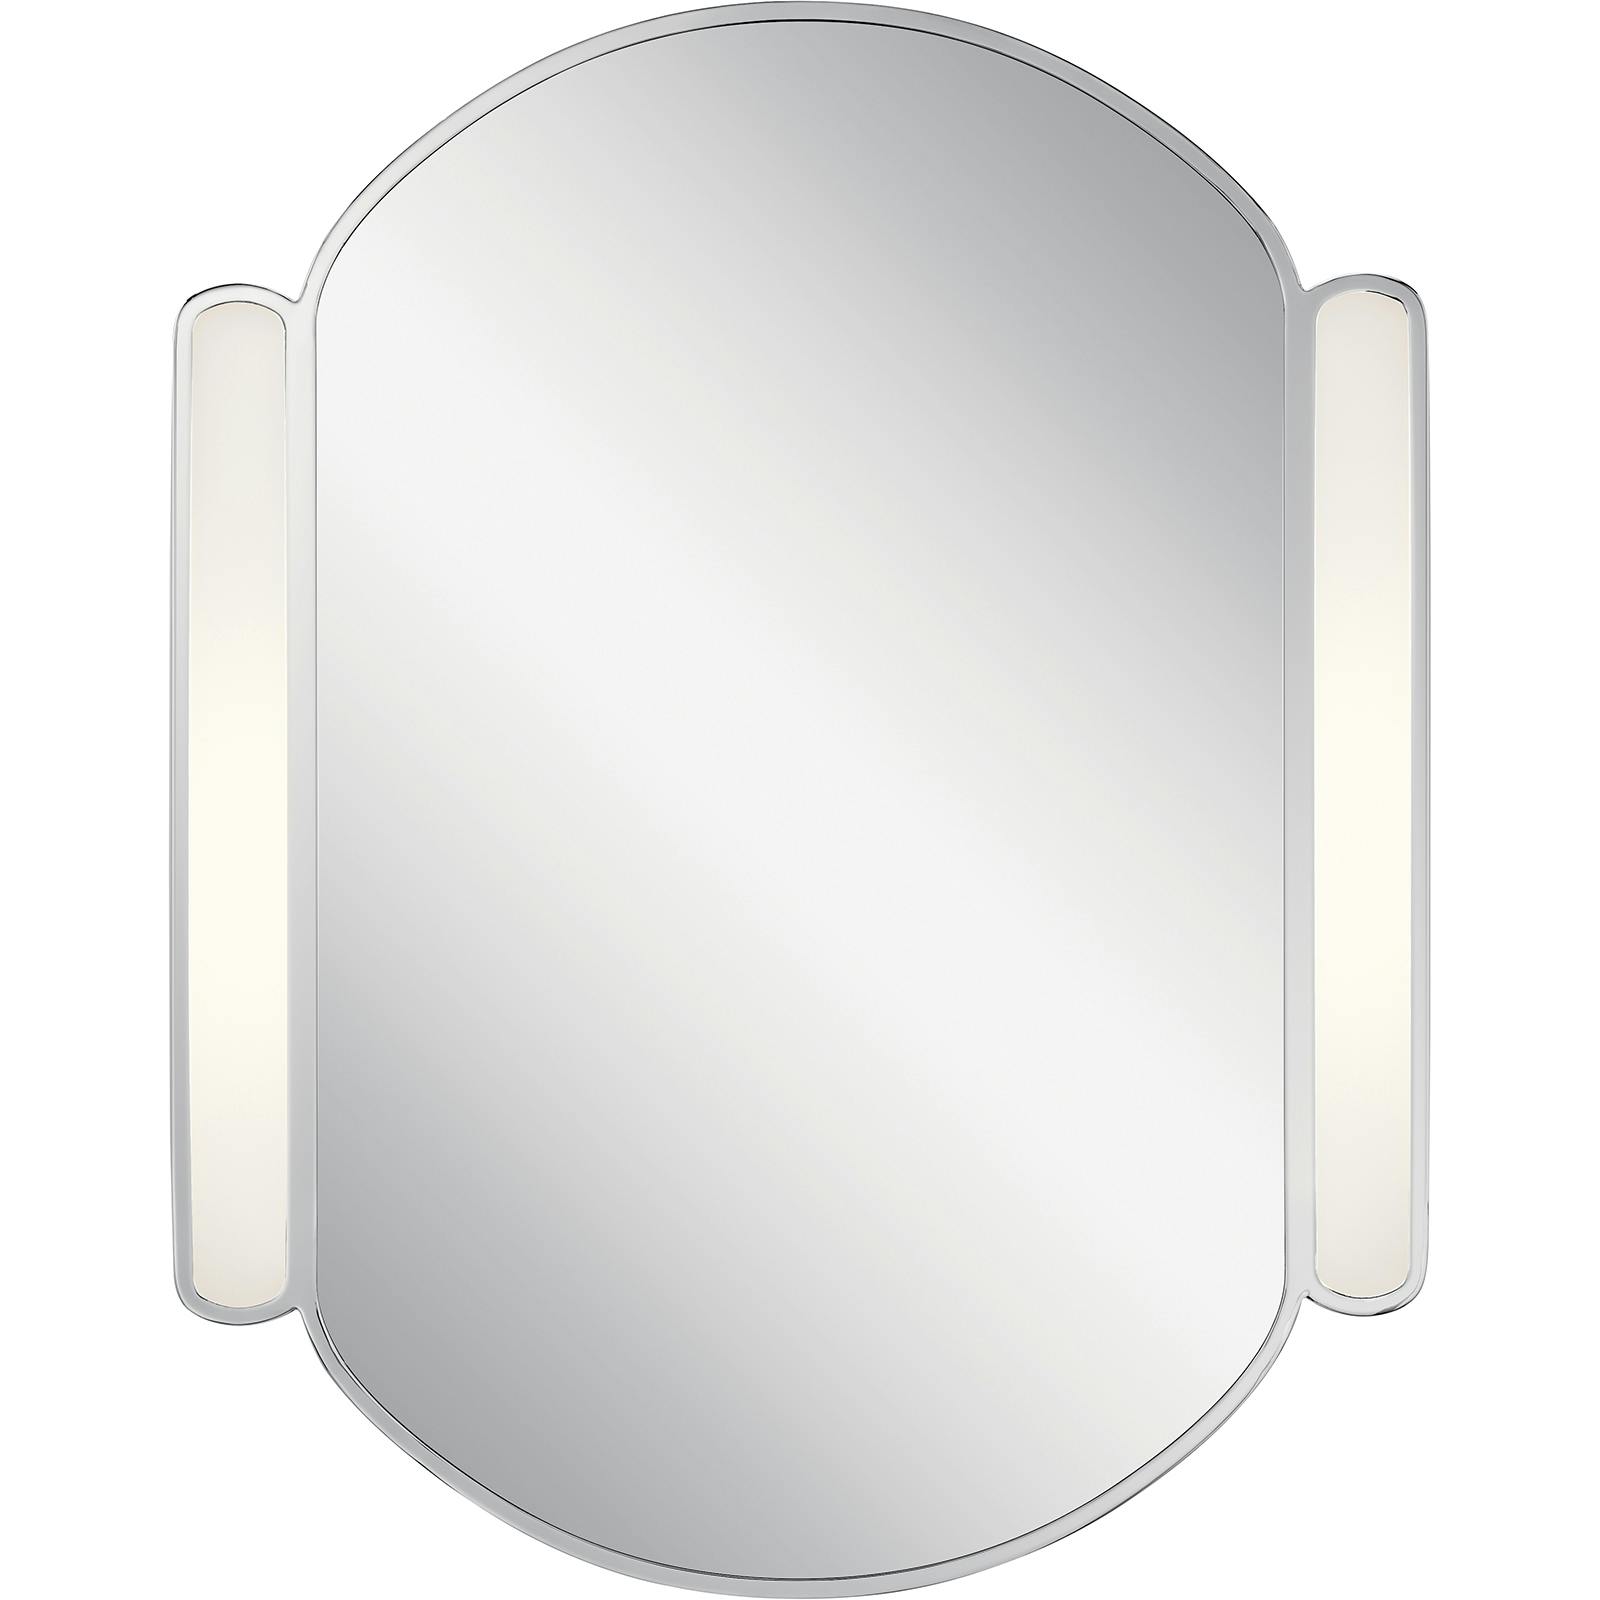 Front view of the Phaelan Lighted Mirror in a Chrome finish on a white background